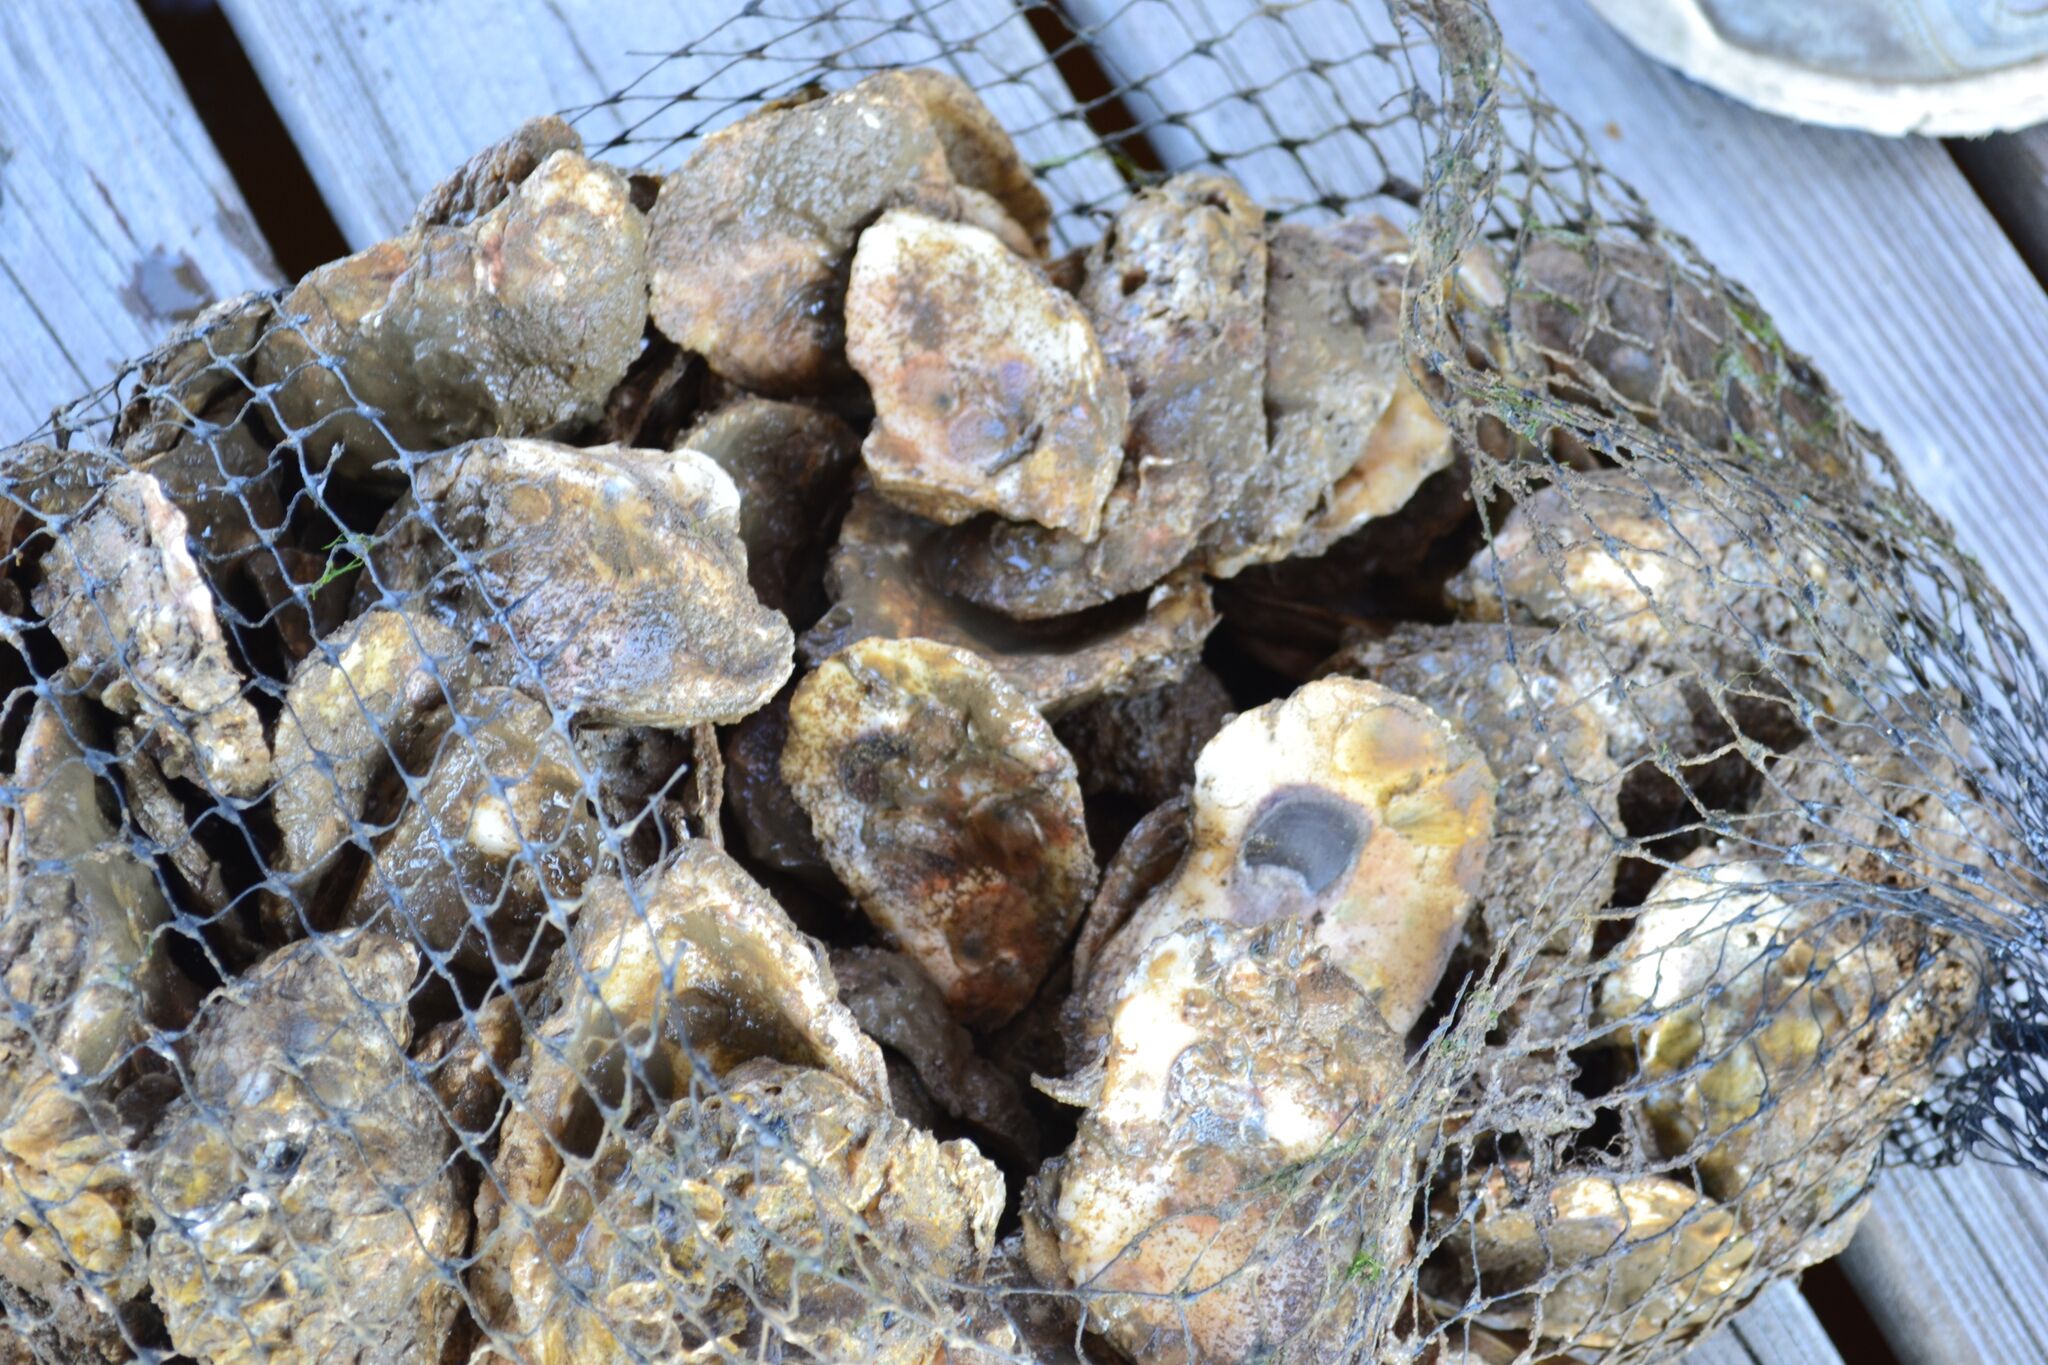 An Expert's Guide to Selecting and Serving Raw Oysters - The Scout Guide